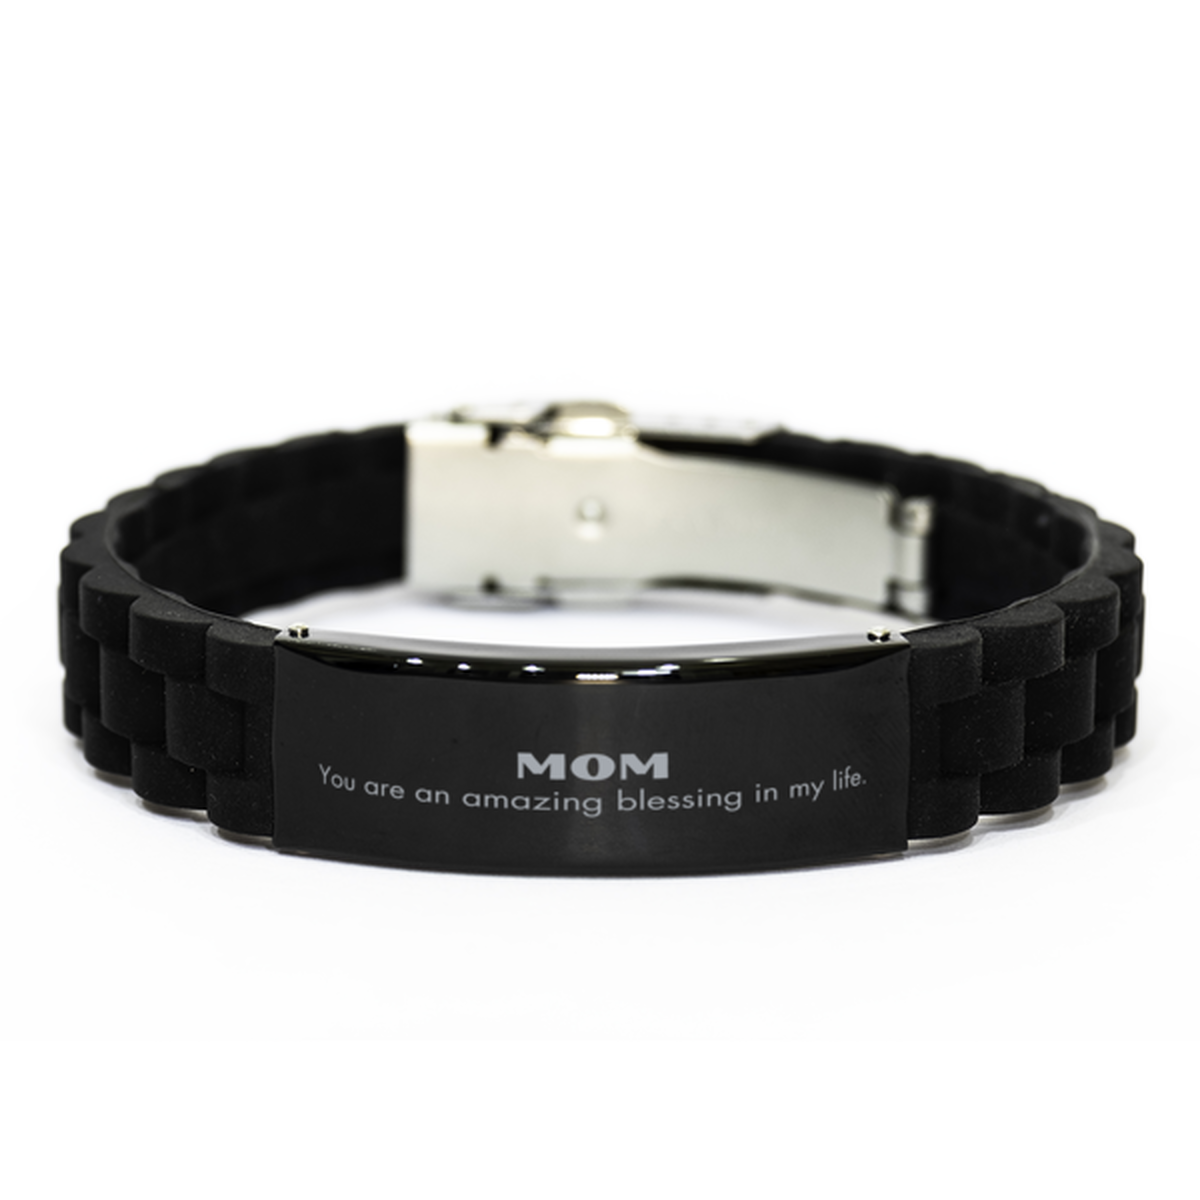 Mom Black Glidelock Clasp Bracelet, You are an amazing blessing in my life, Thank You Gifts For Mom, Inspirational Birthday Christmas Unique Gifts For Mom